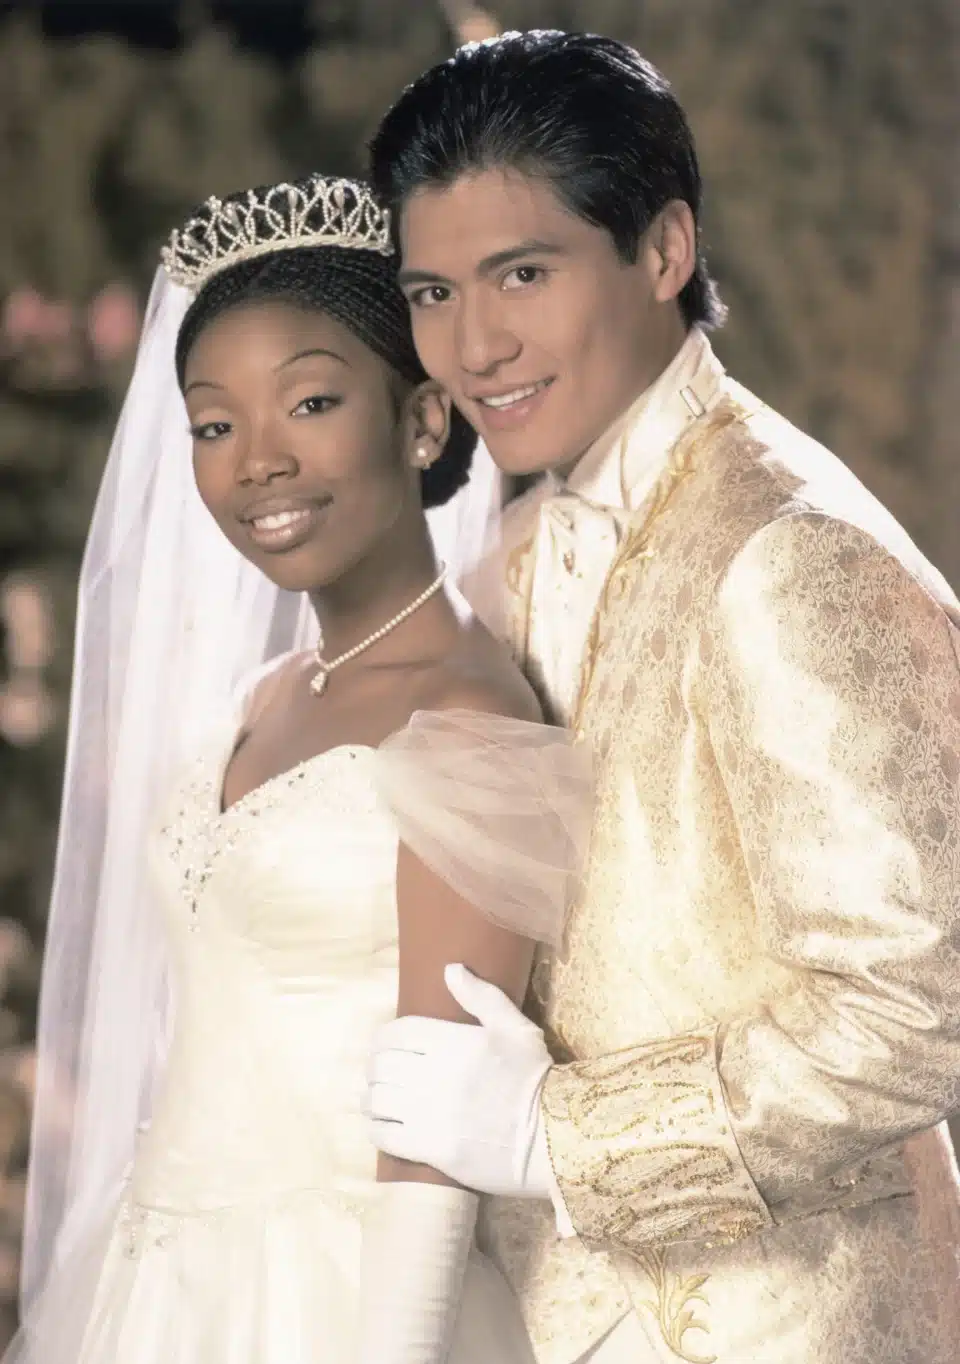 Brandy and Paolo Montalban